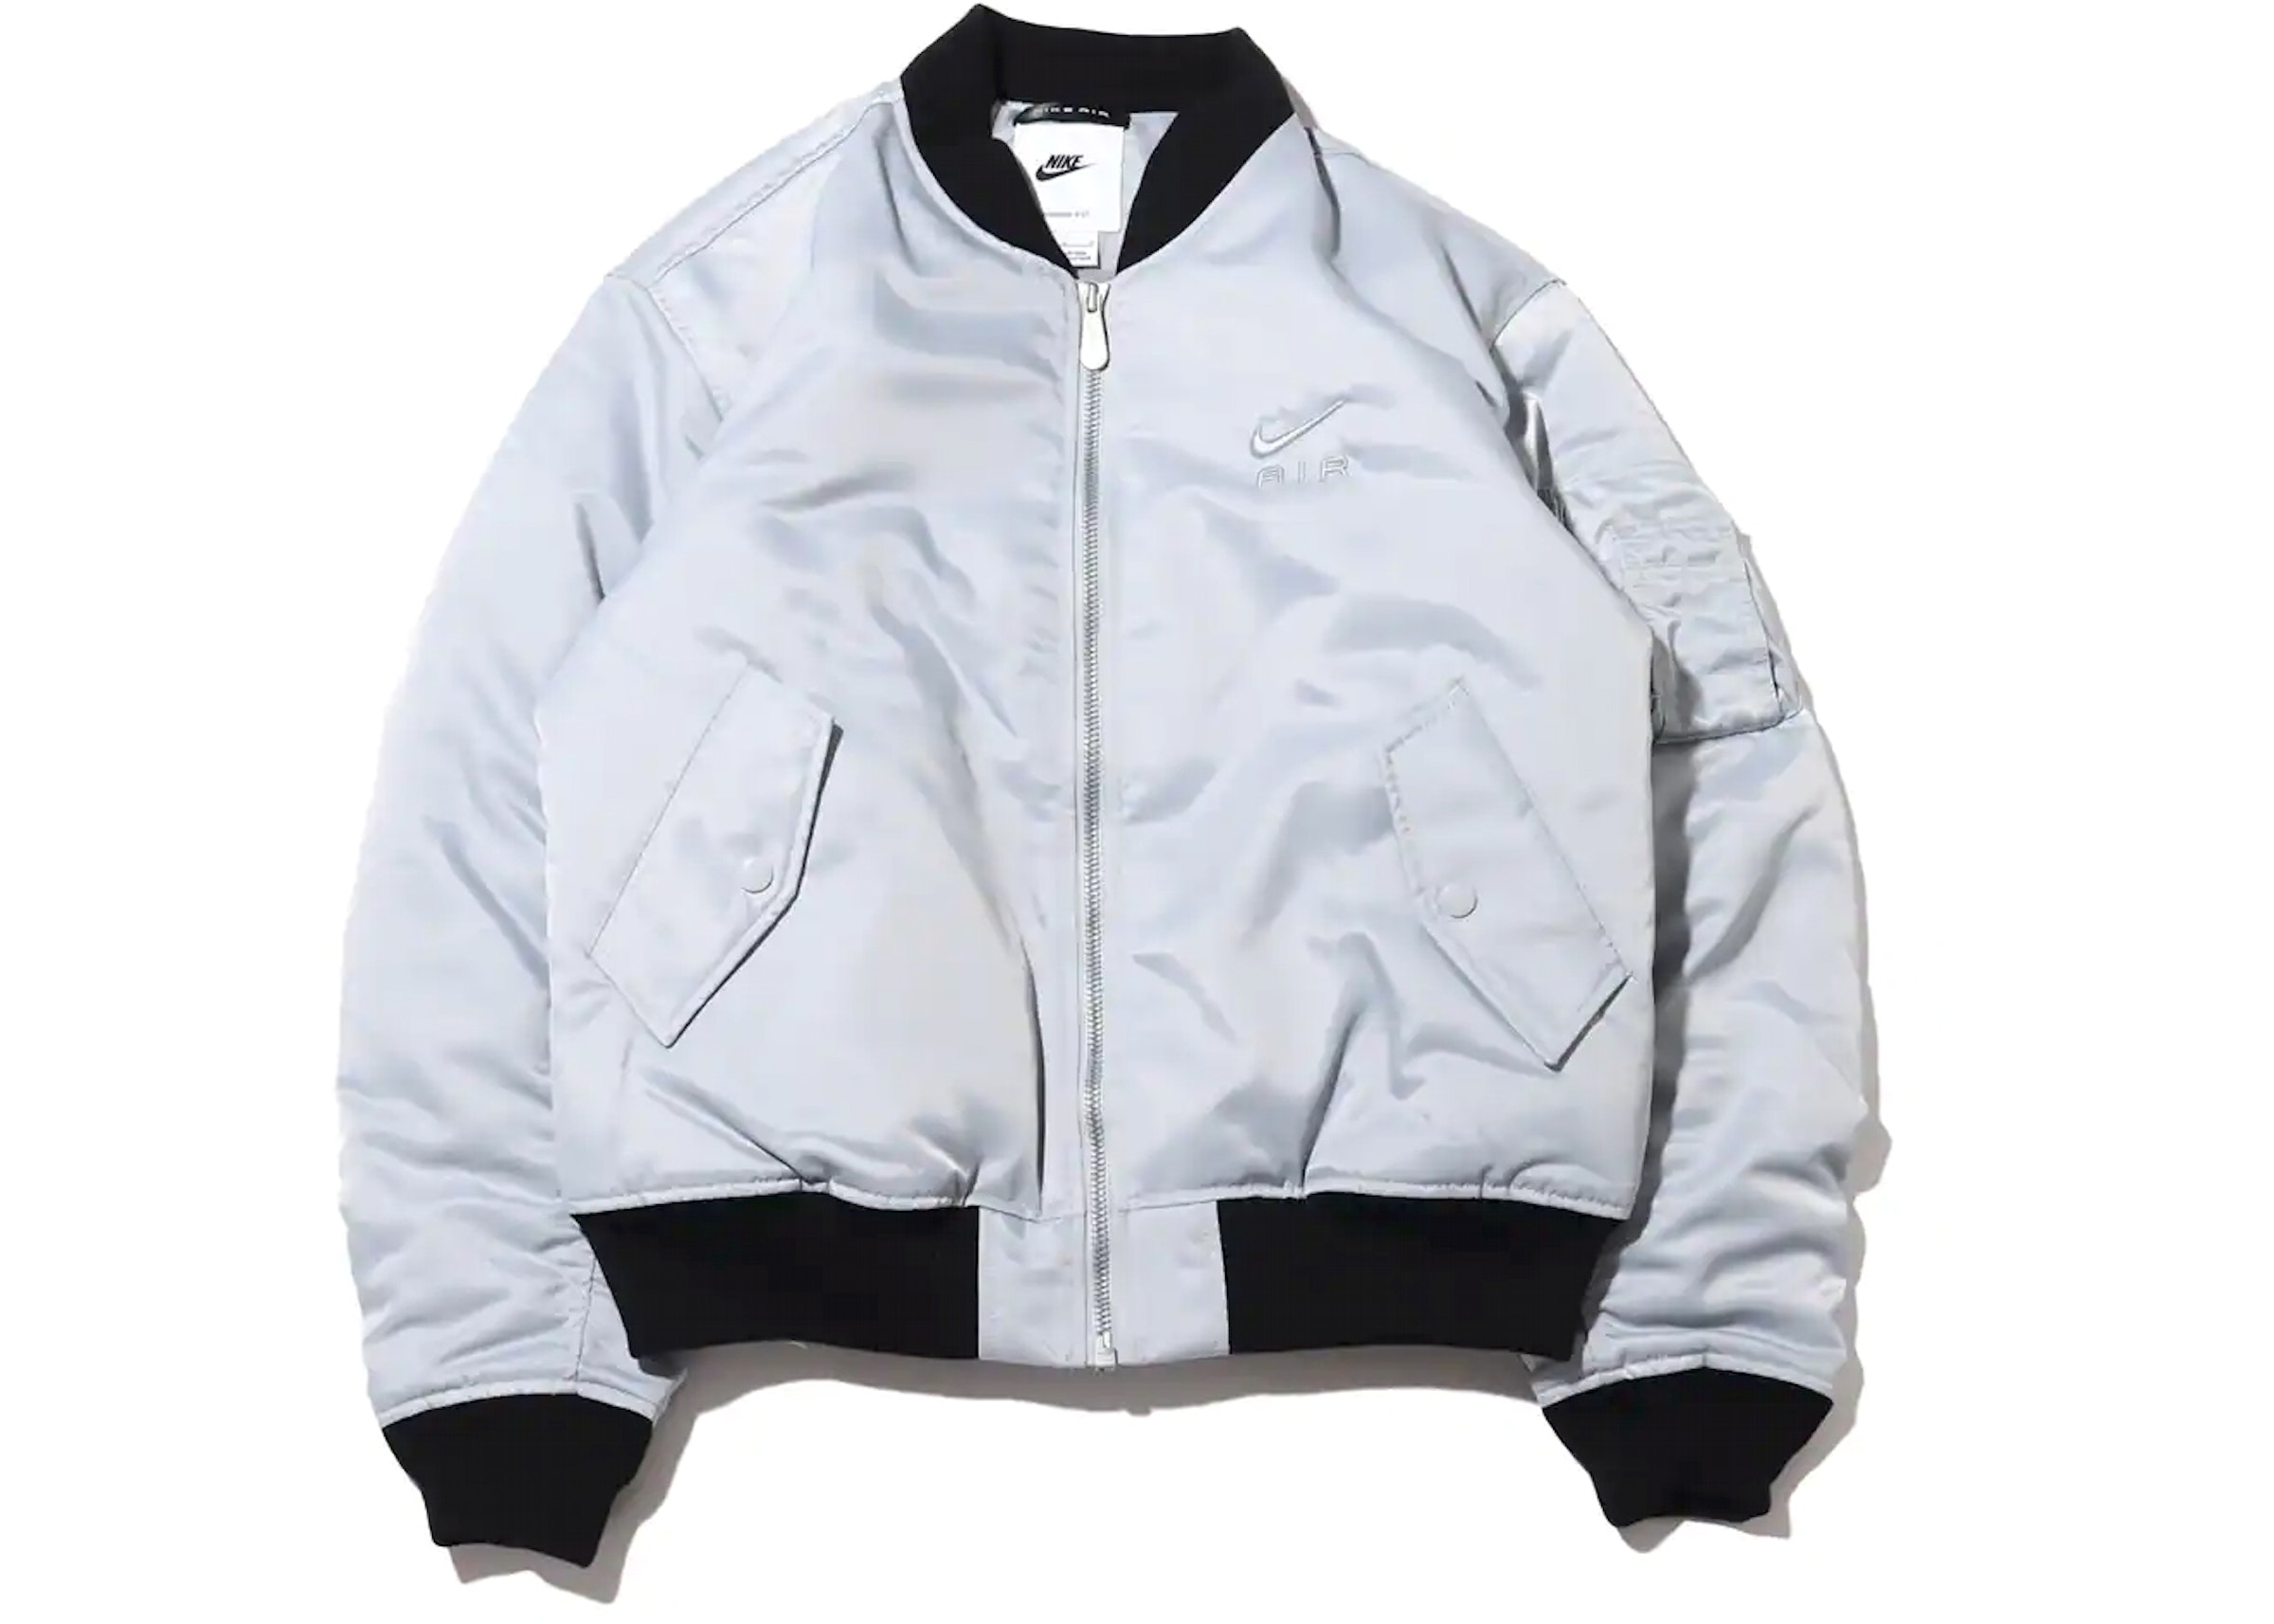 abrazo Inconcebible Previamente Nike Sportswear Air Bomber Jacket (Asia Sizing) Wolf Grey - SS23 Men's - US